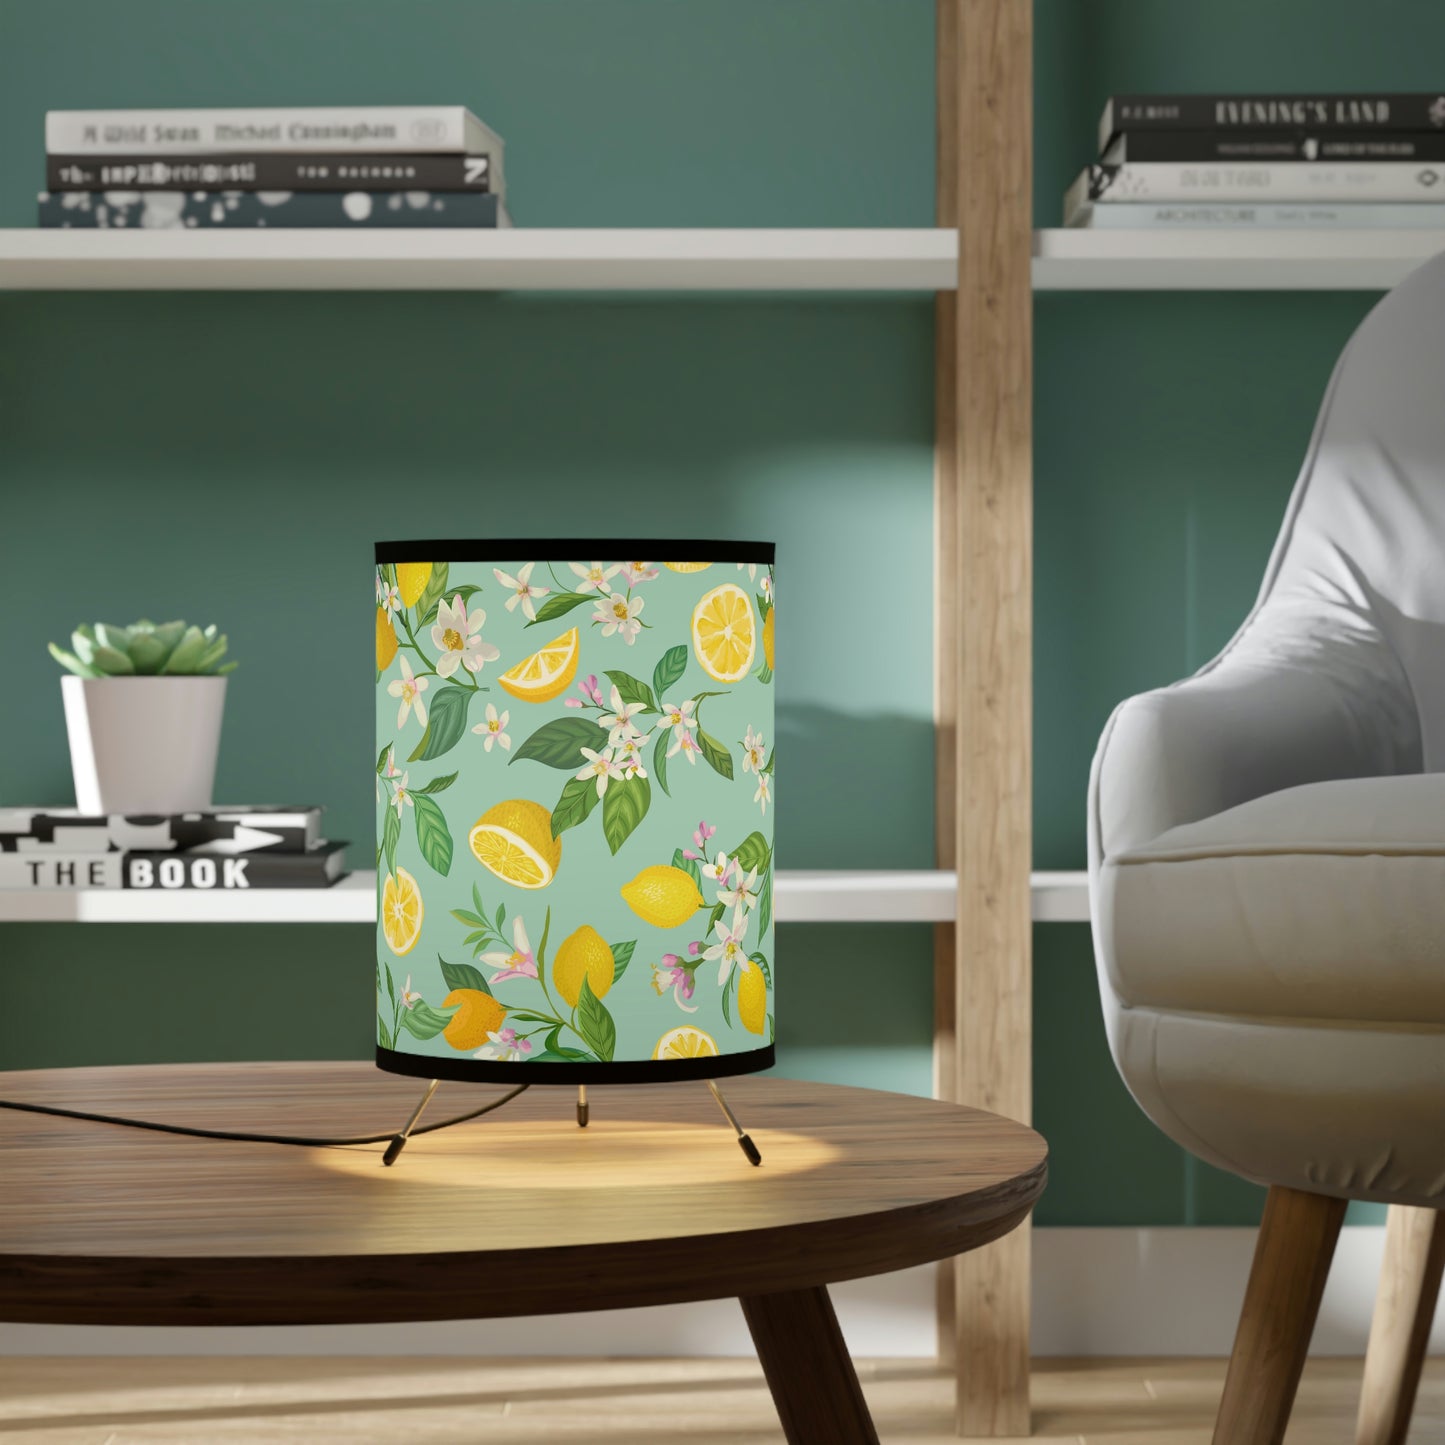 Lemons and Flowers Tripod Lamp with High-Res Printed Shade